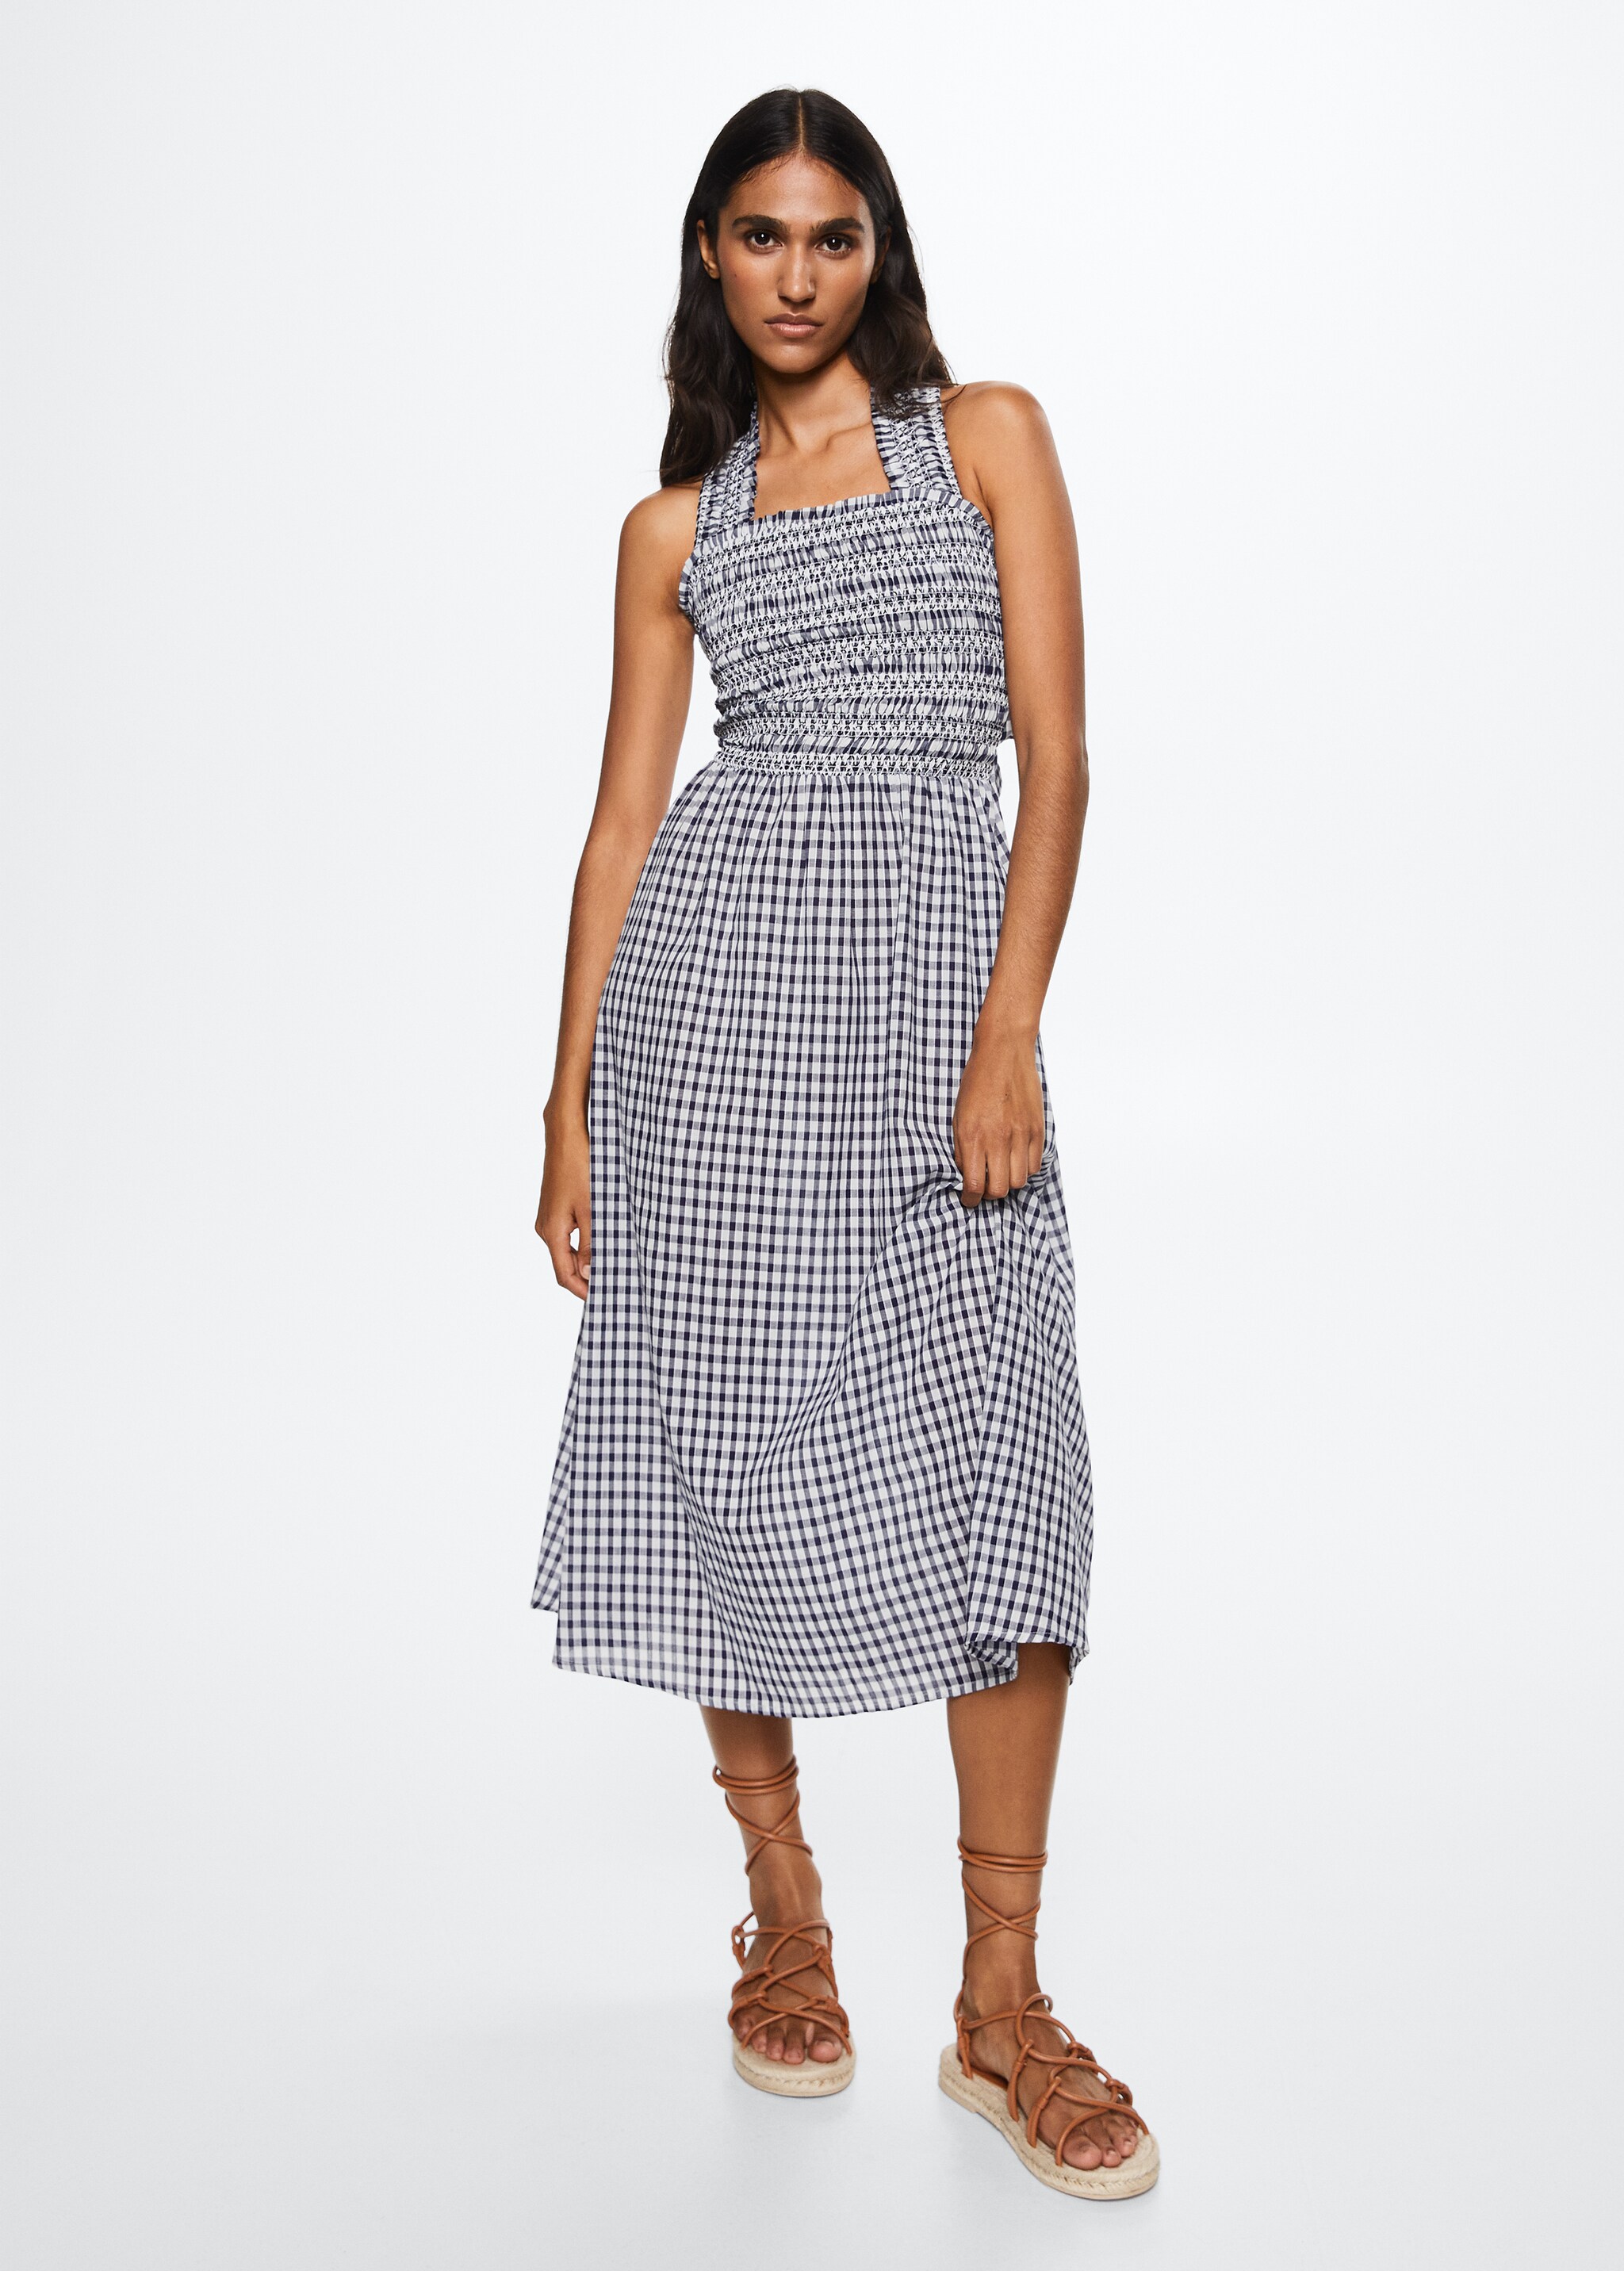 Gingham check cottoned dress - General plane